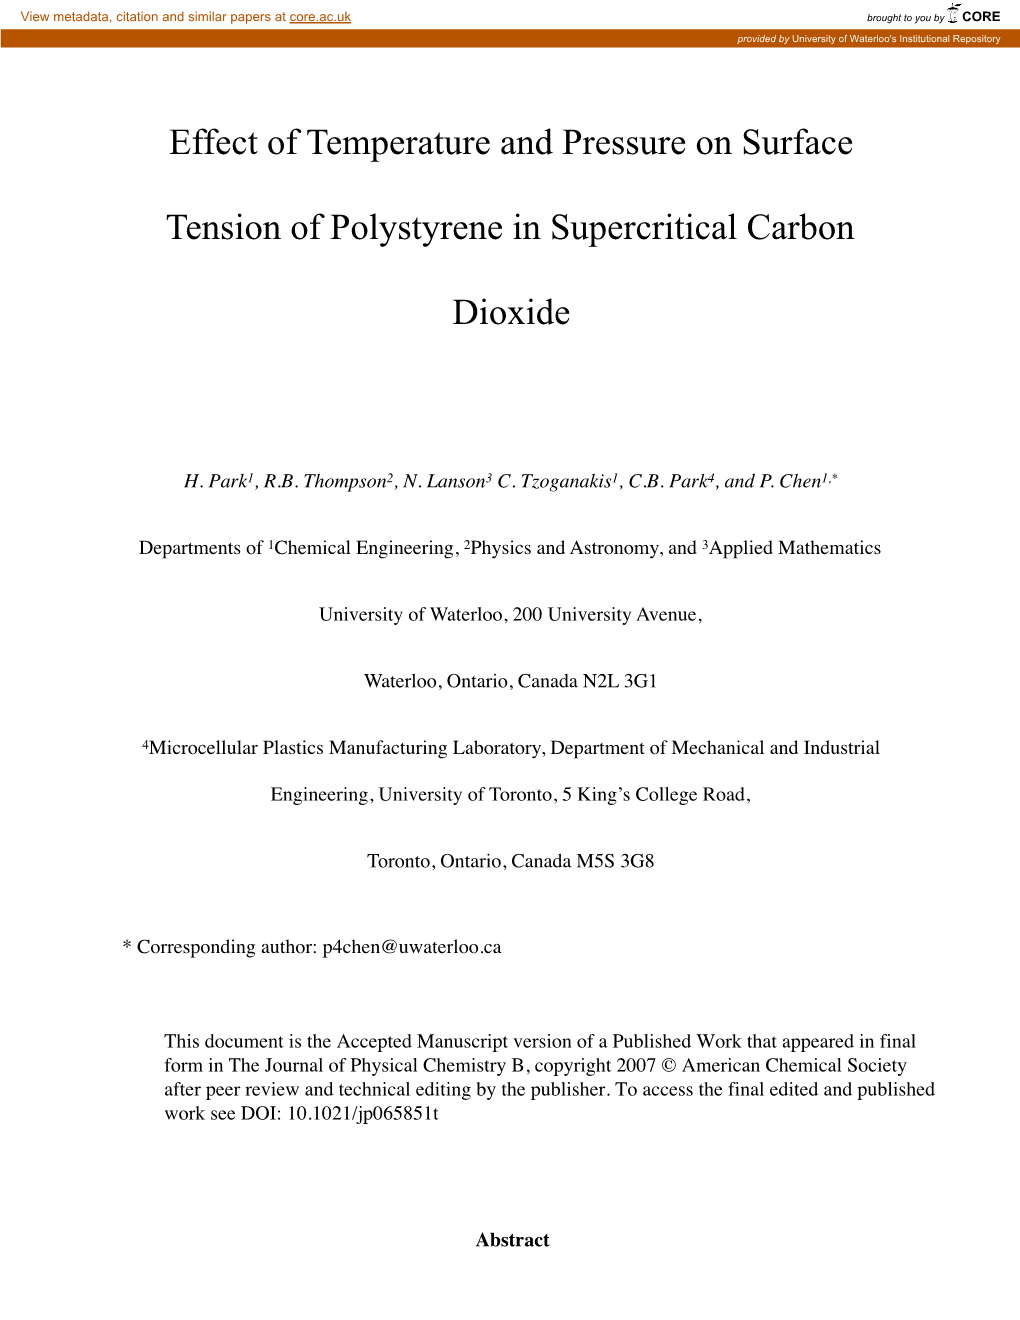 Effect of Temperature and Pressure on Surface Tension of Polystyrene In